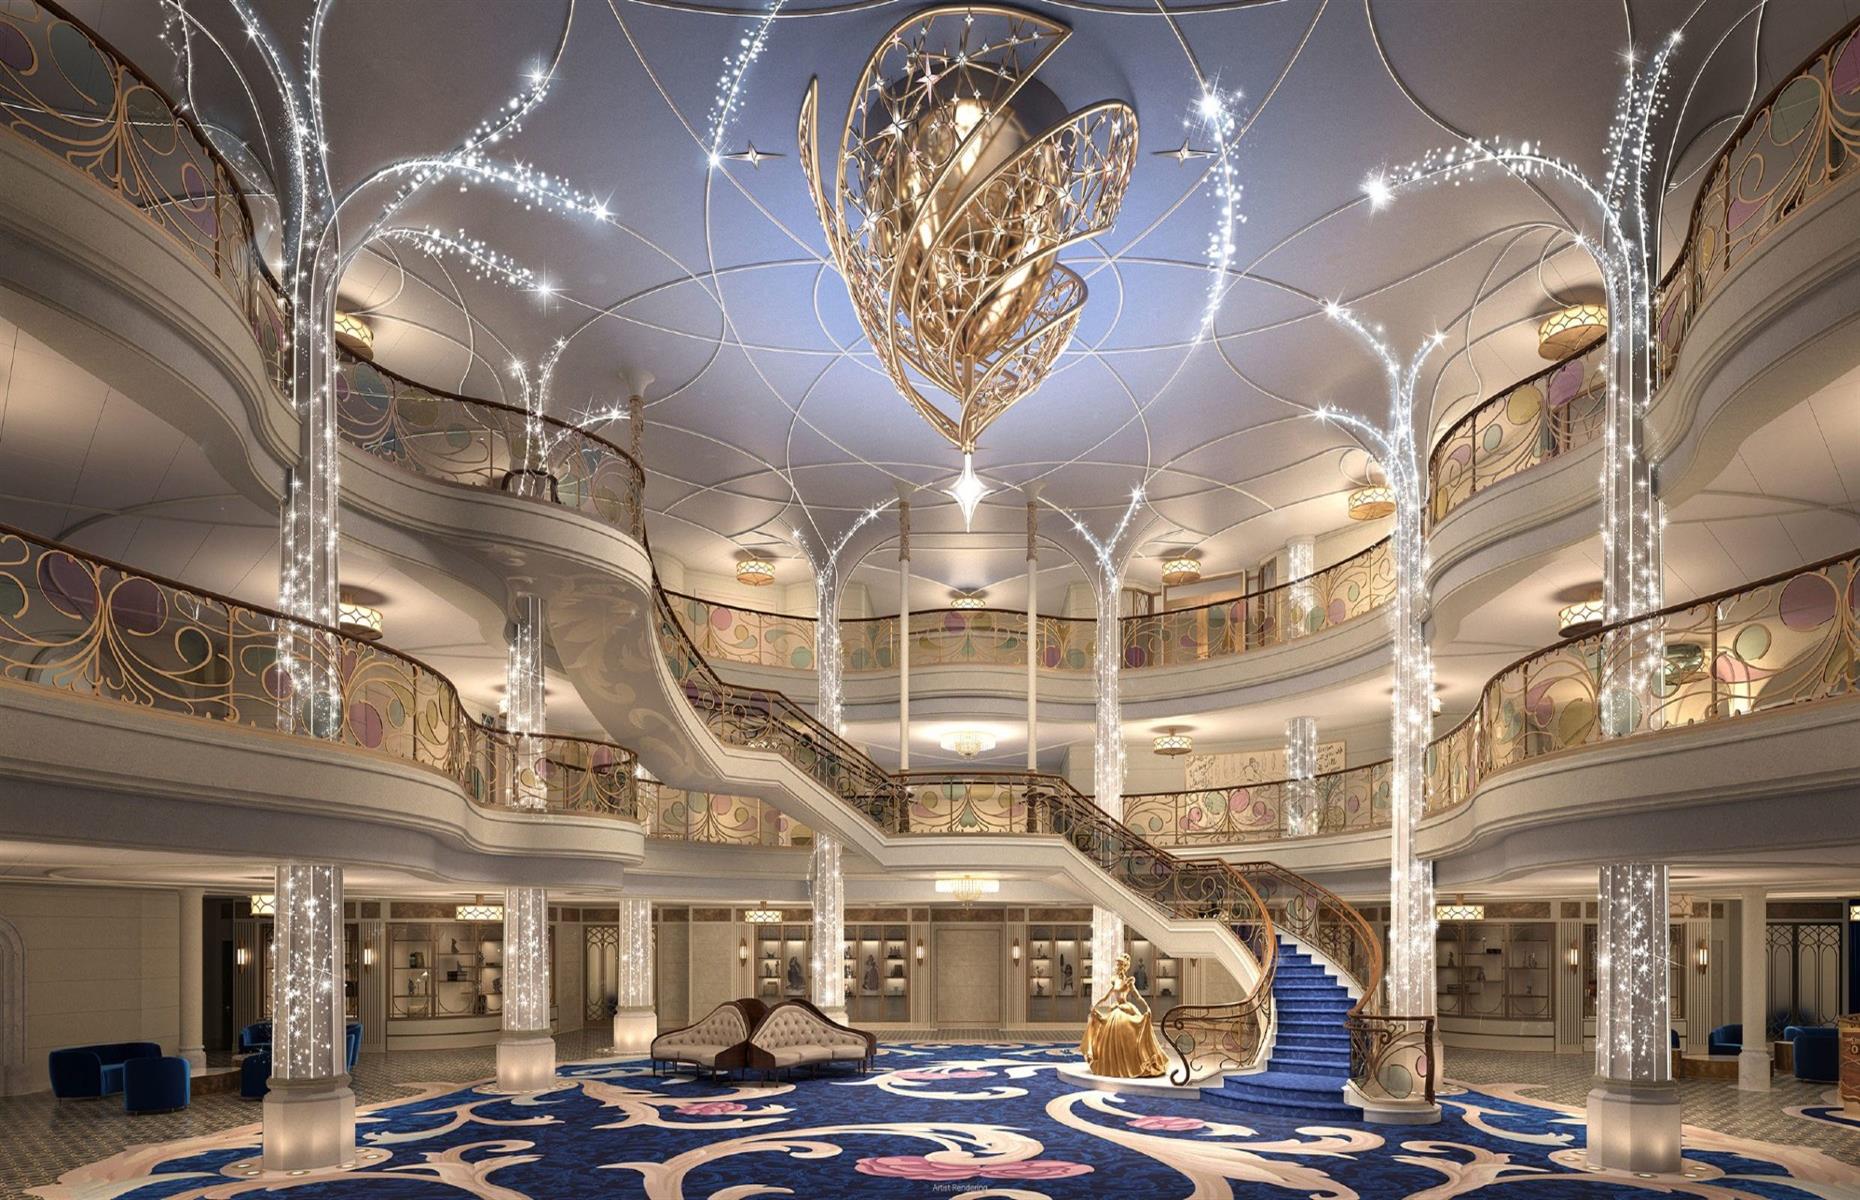 <p>Disney Cruise Line’s imagineers have once again created a world of enchantment, this time aboard the <a href="https://disneycruise.disney.go.com/why-cruise-disney/wish/">Disney Wish</a>. The ship, set to welcome her first guests in summer 2022, has a distinctly Disney design concept inspired by timeless tales. The motif of enchantment will manifest throughout the ship, from the magical forest setting of the Walt Disney Theatre and storybook-inspired staterooms to the fairy-tale-castle-inspired Grand Hall, where a dazzling wishing star descends from the shimmering chandelier above.</p>